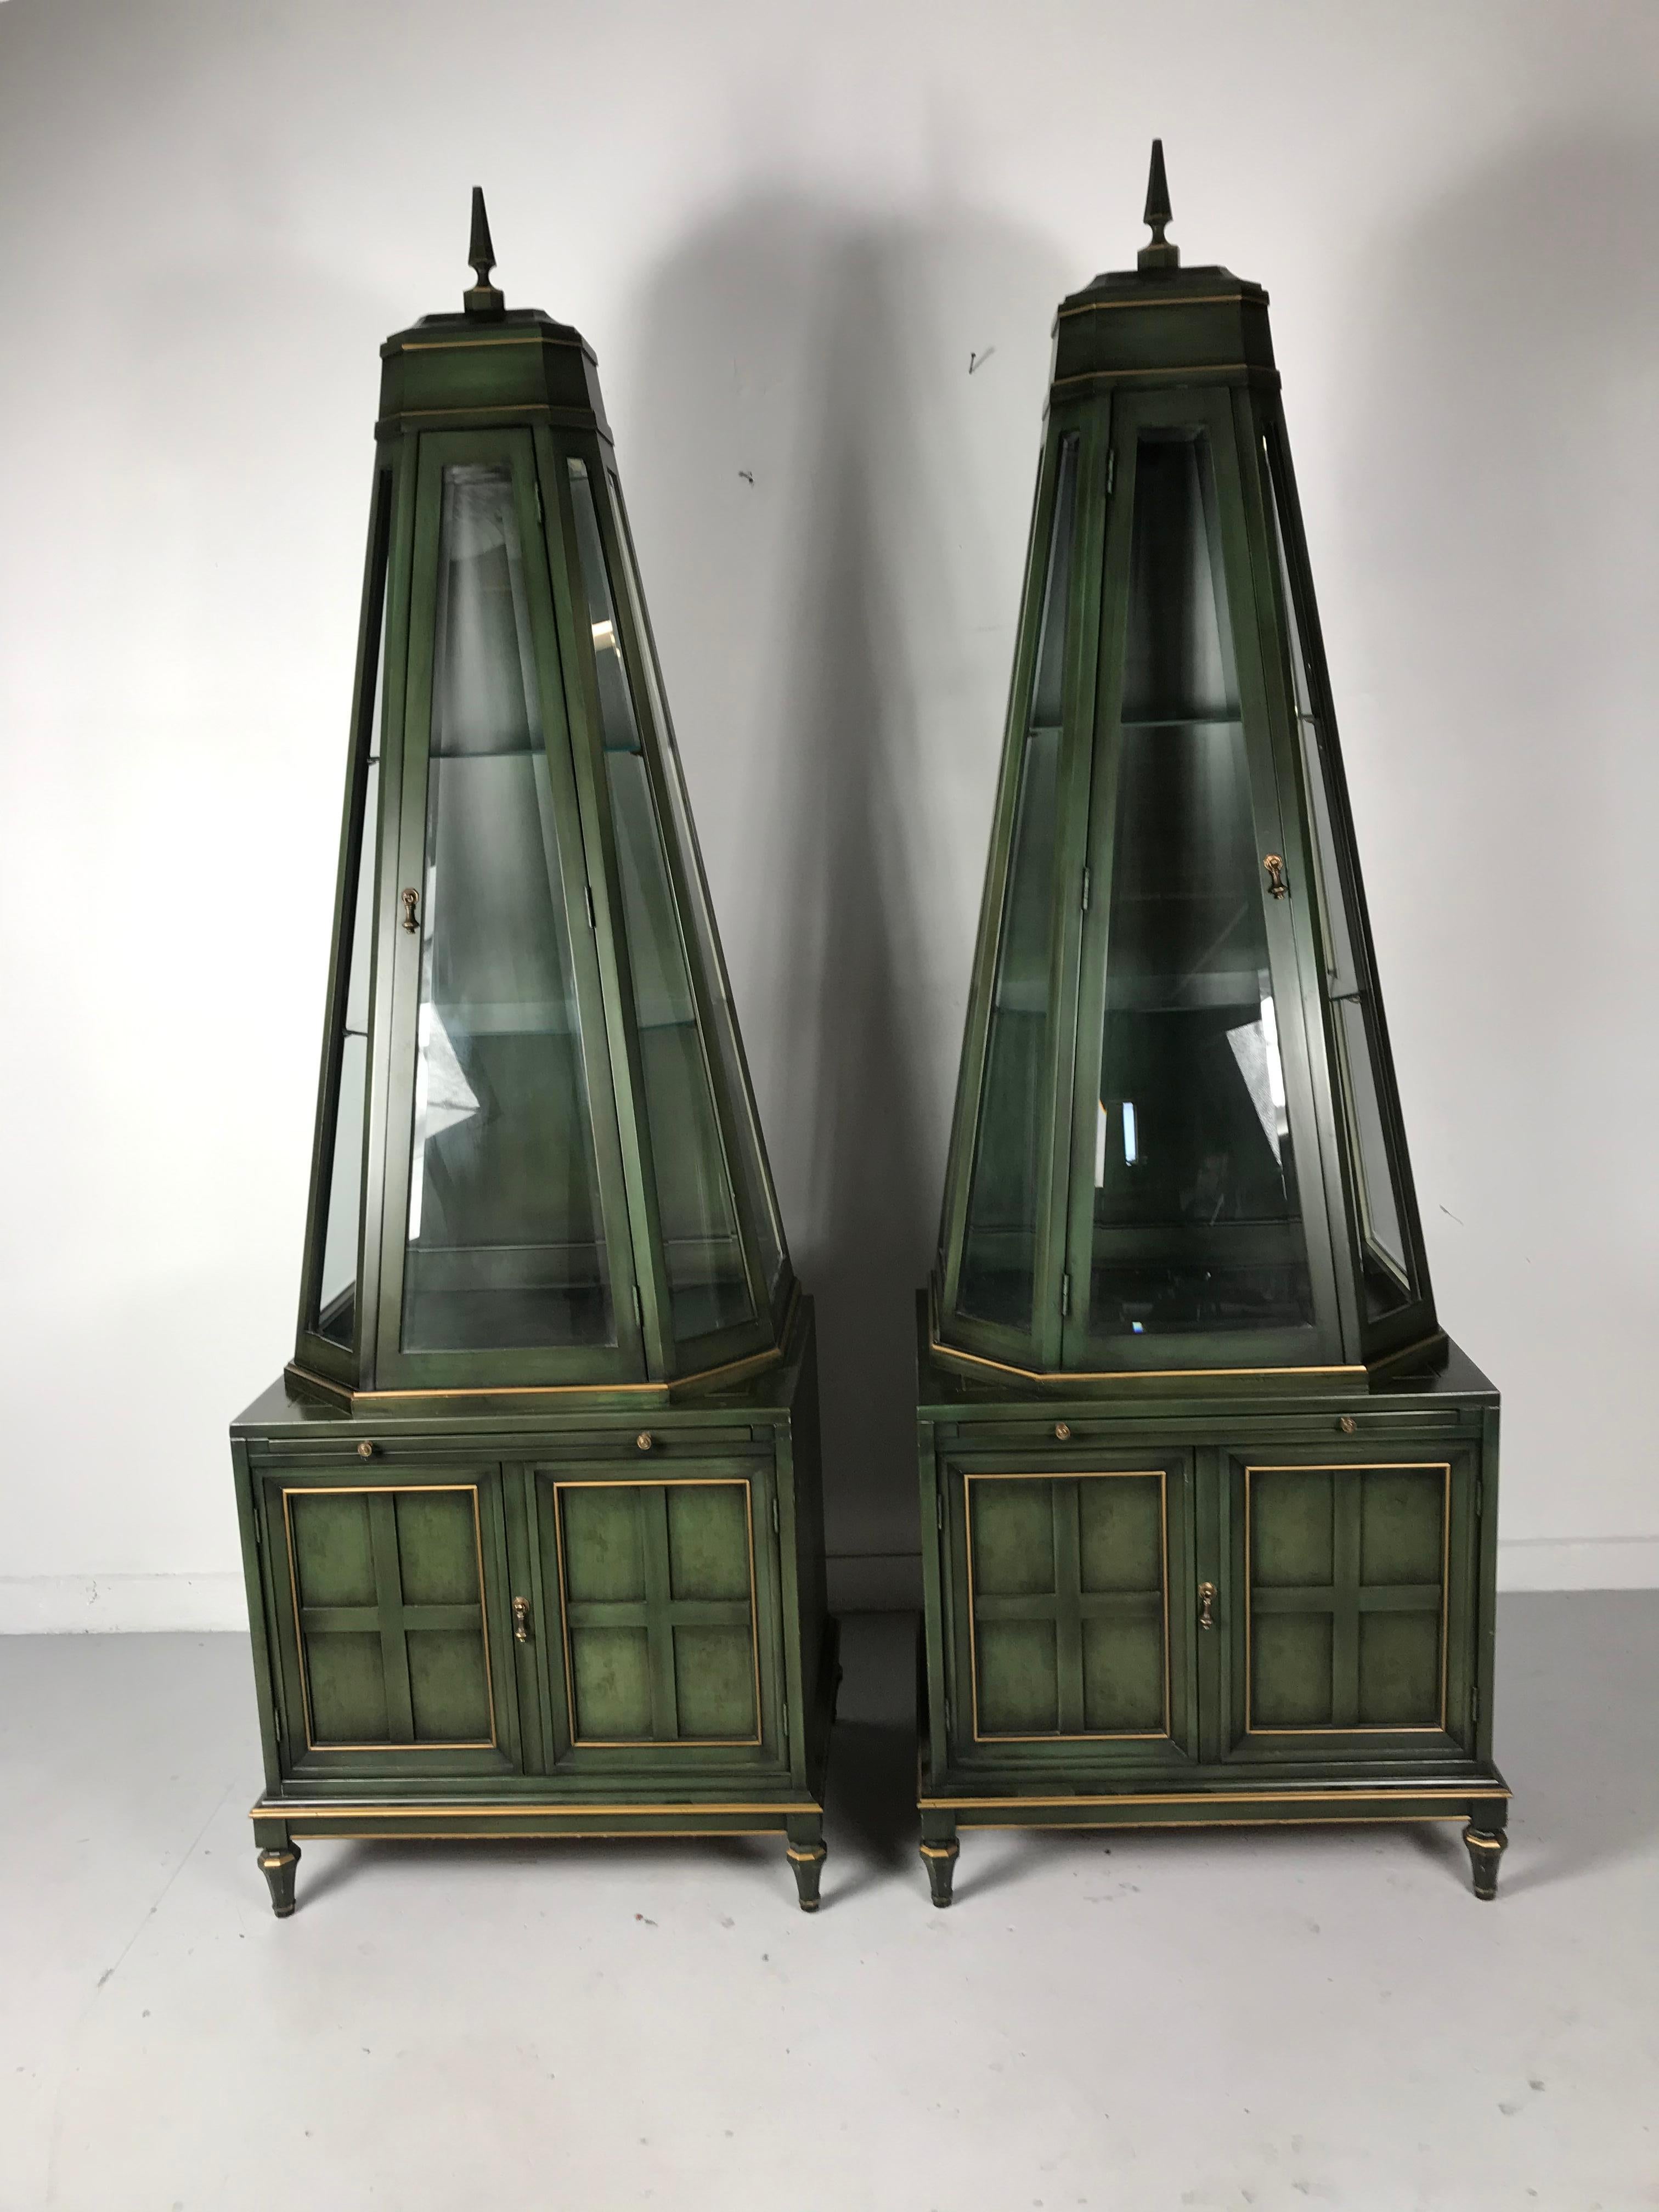 American Unusual Pair of Decorative Pyramidal Curio Cabinets, Vitrines by Union National